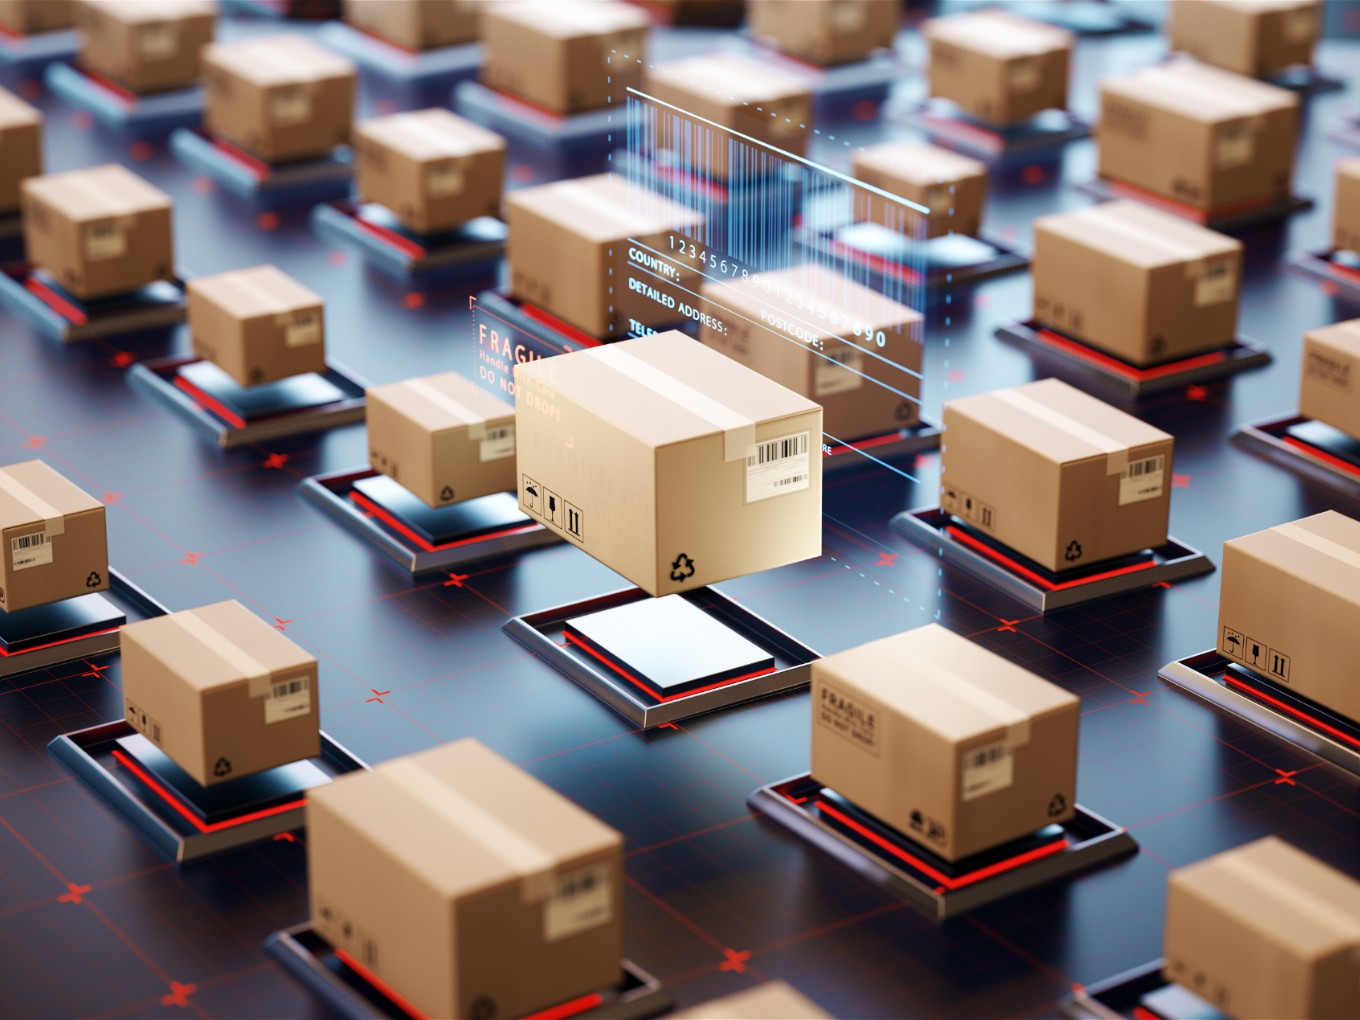 Revolutionising Supply Chain Logistics With IoT And Machine Learning